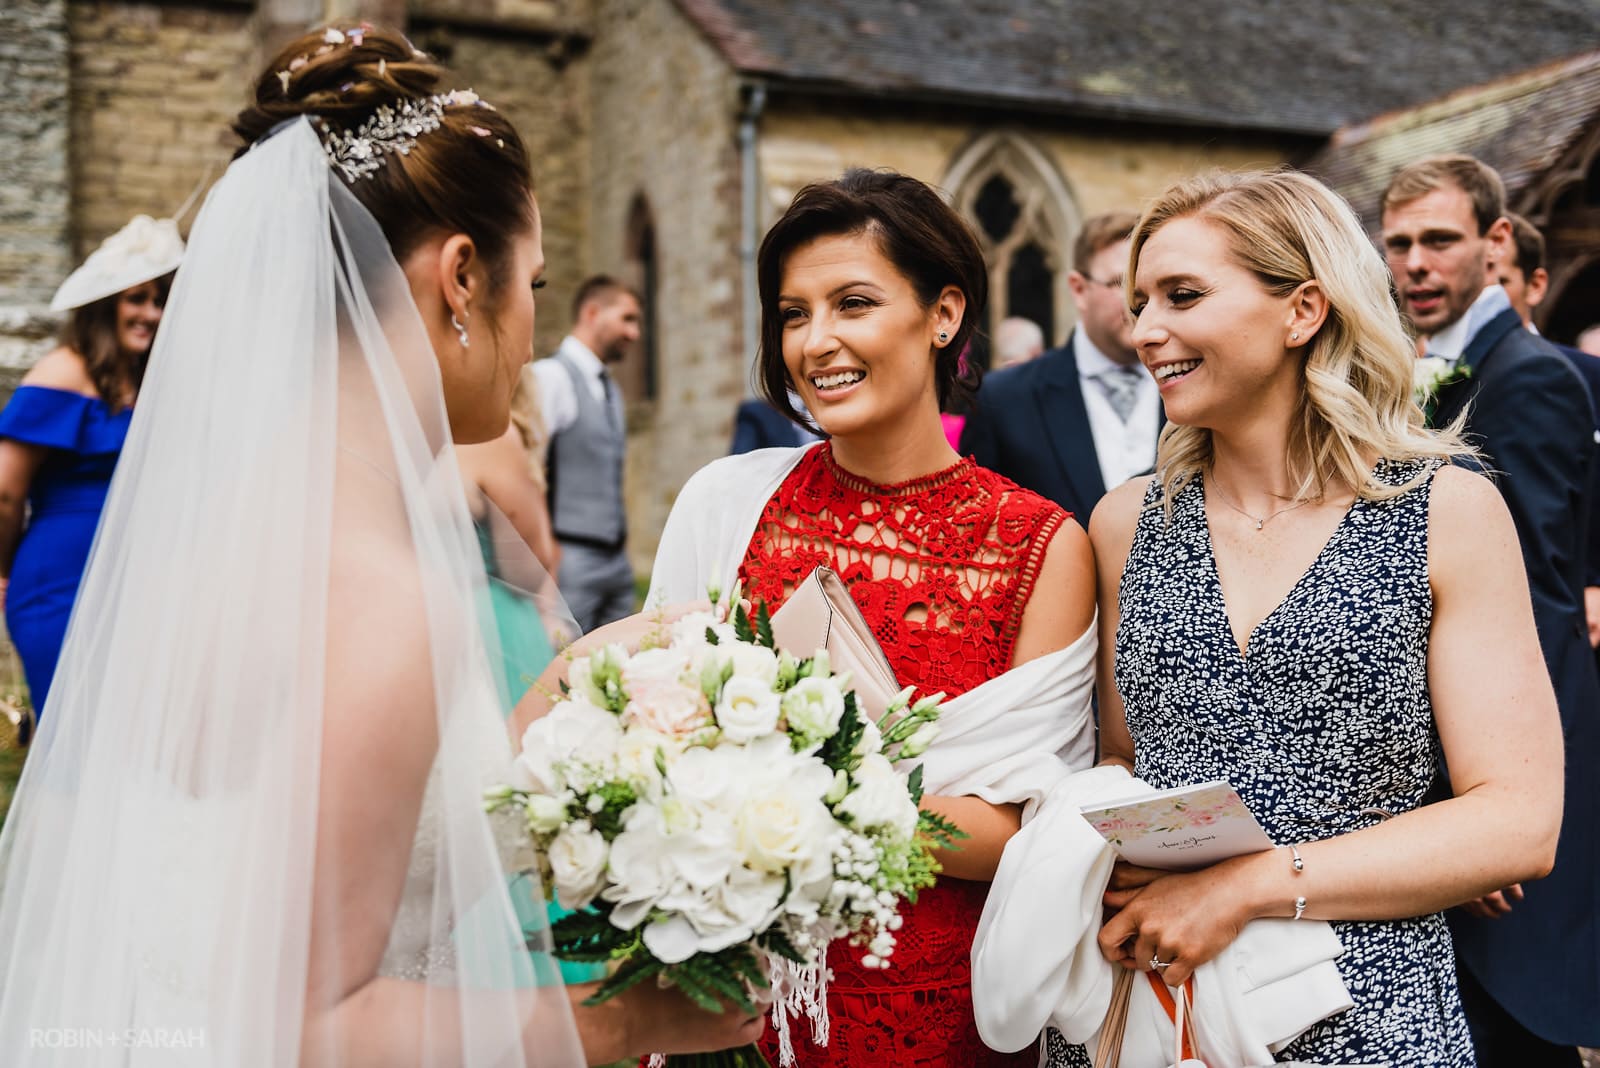 Bride chats to wedding guests after wedding ceremony